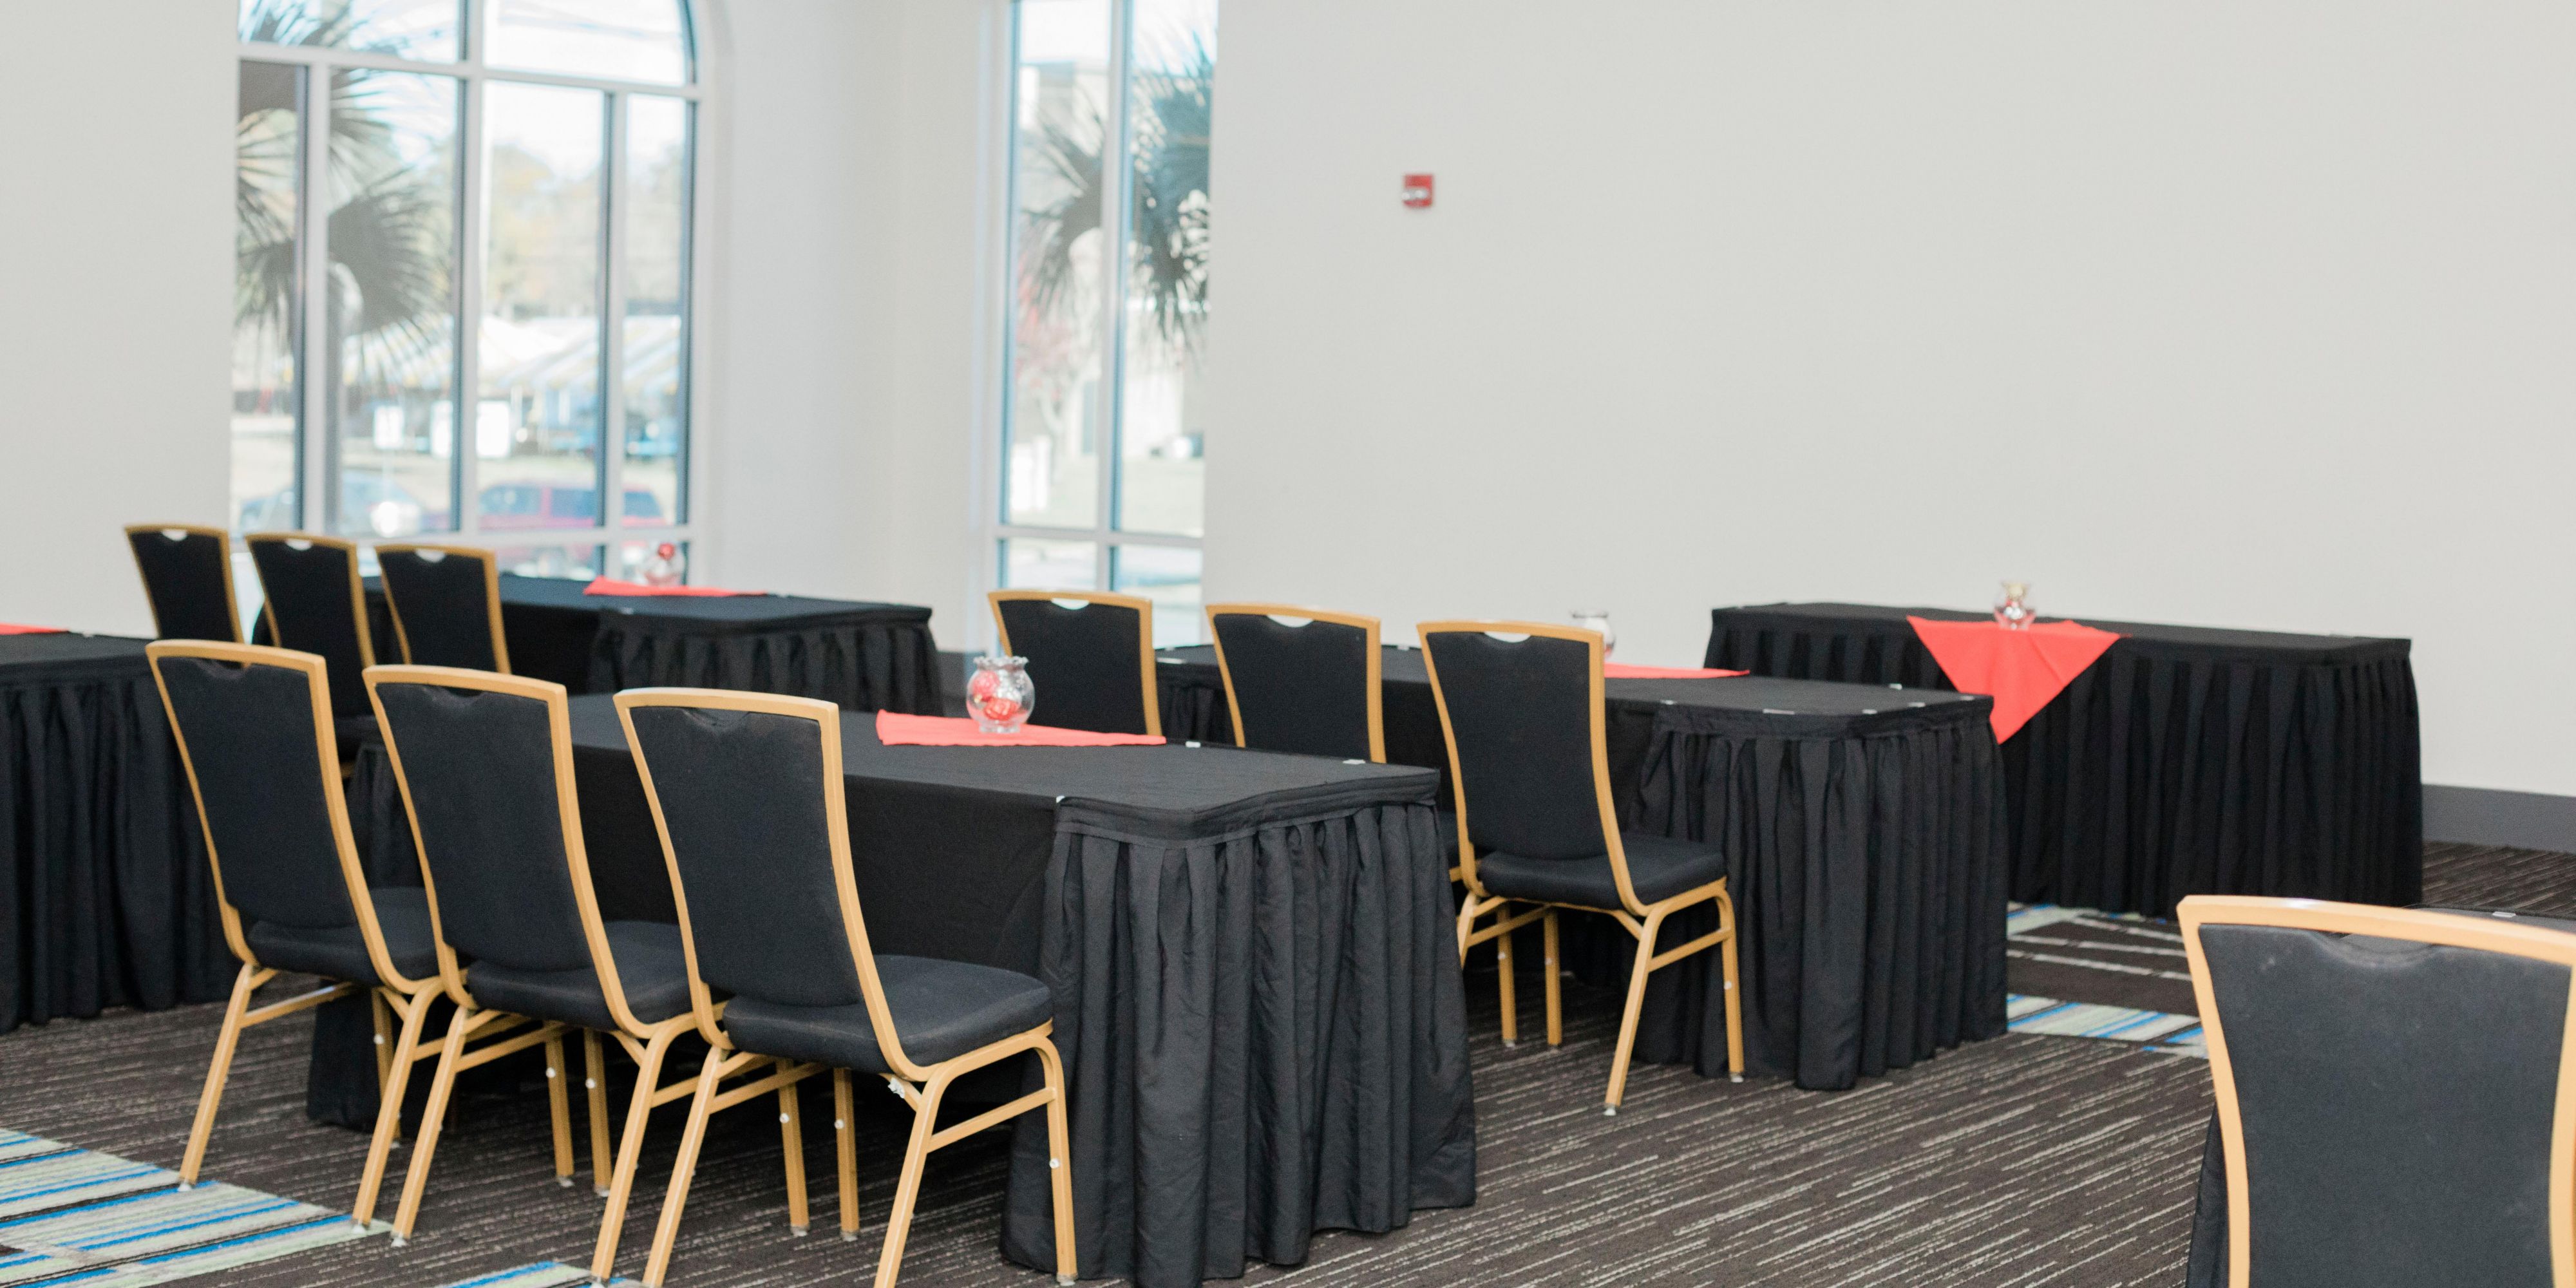 We are delighted to offer a variety of options for your next meeting or event. Our comfortable suite rooms and functional meeting rooms will provide an ideal setting for a wide range of events and can accommodate up to 100 guests.